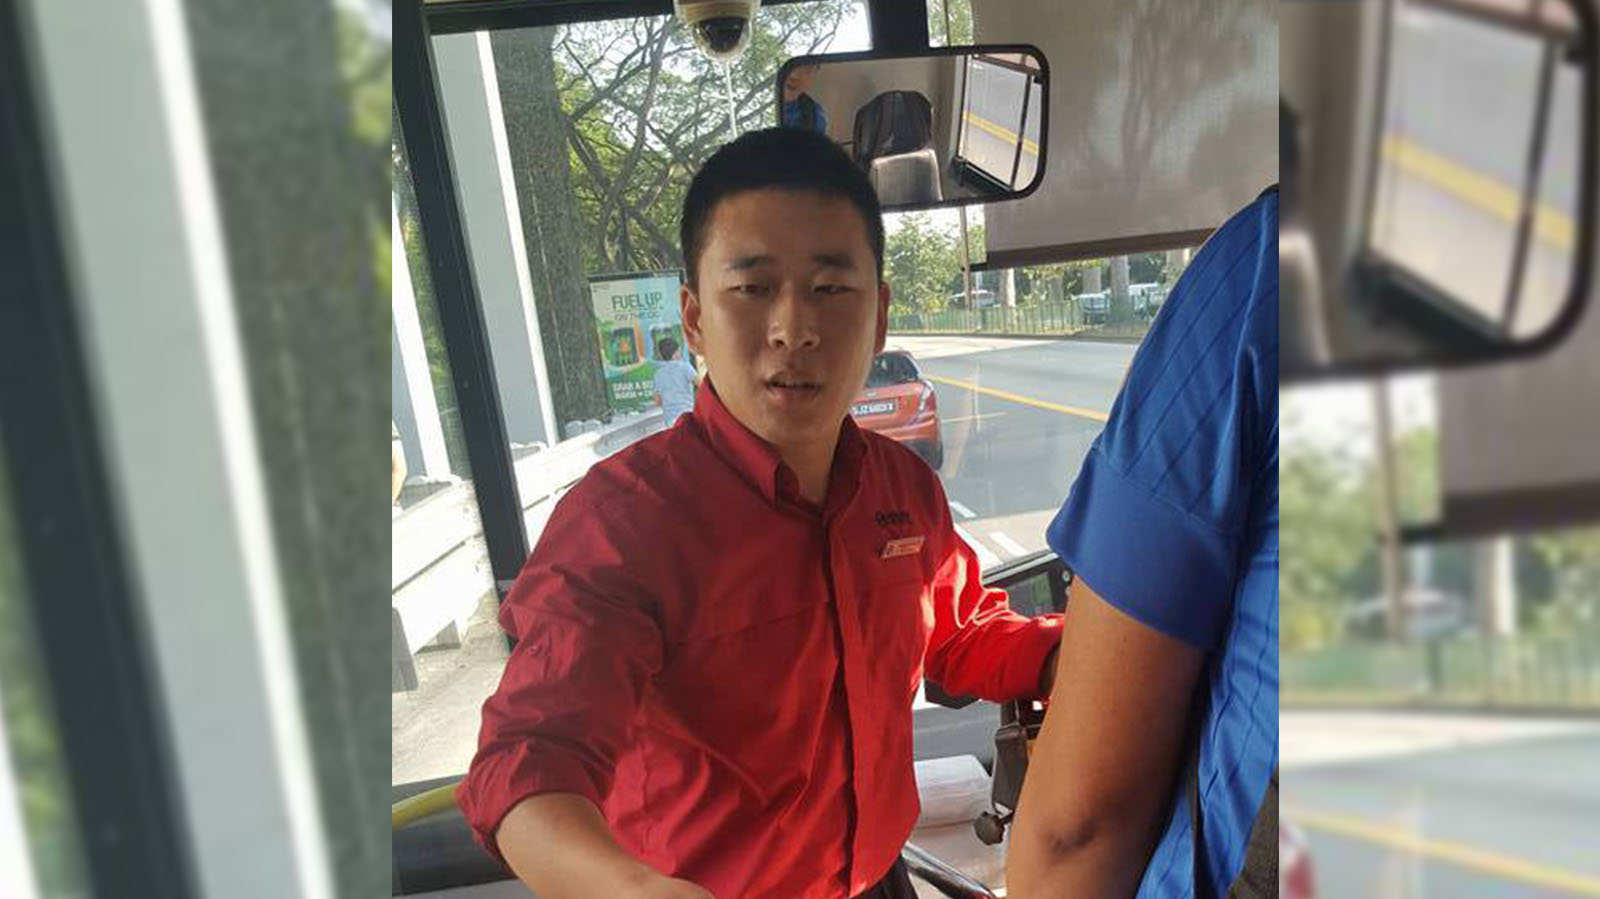 It’s not easy being a bus captain in Singapore if you’re PRC